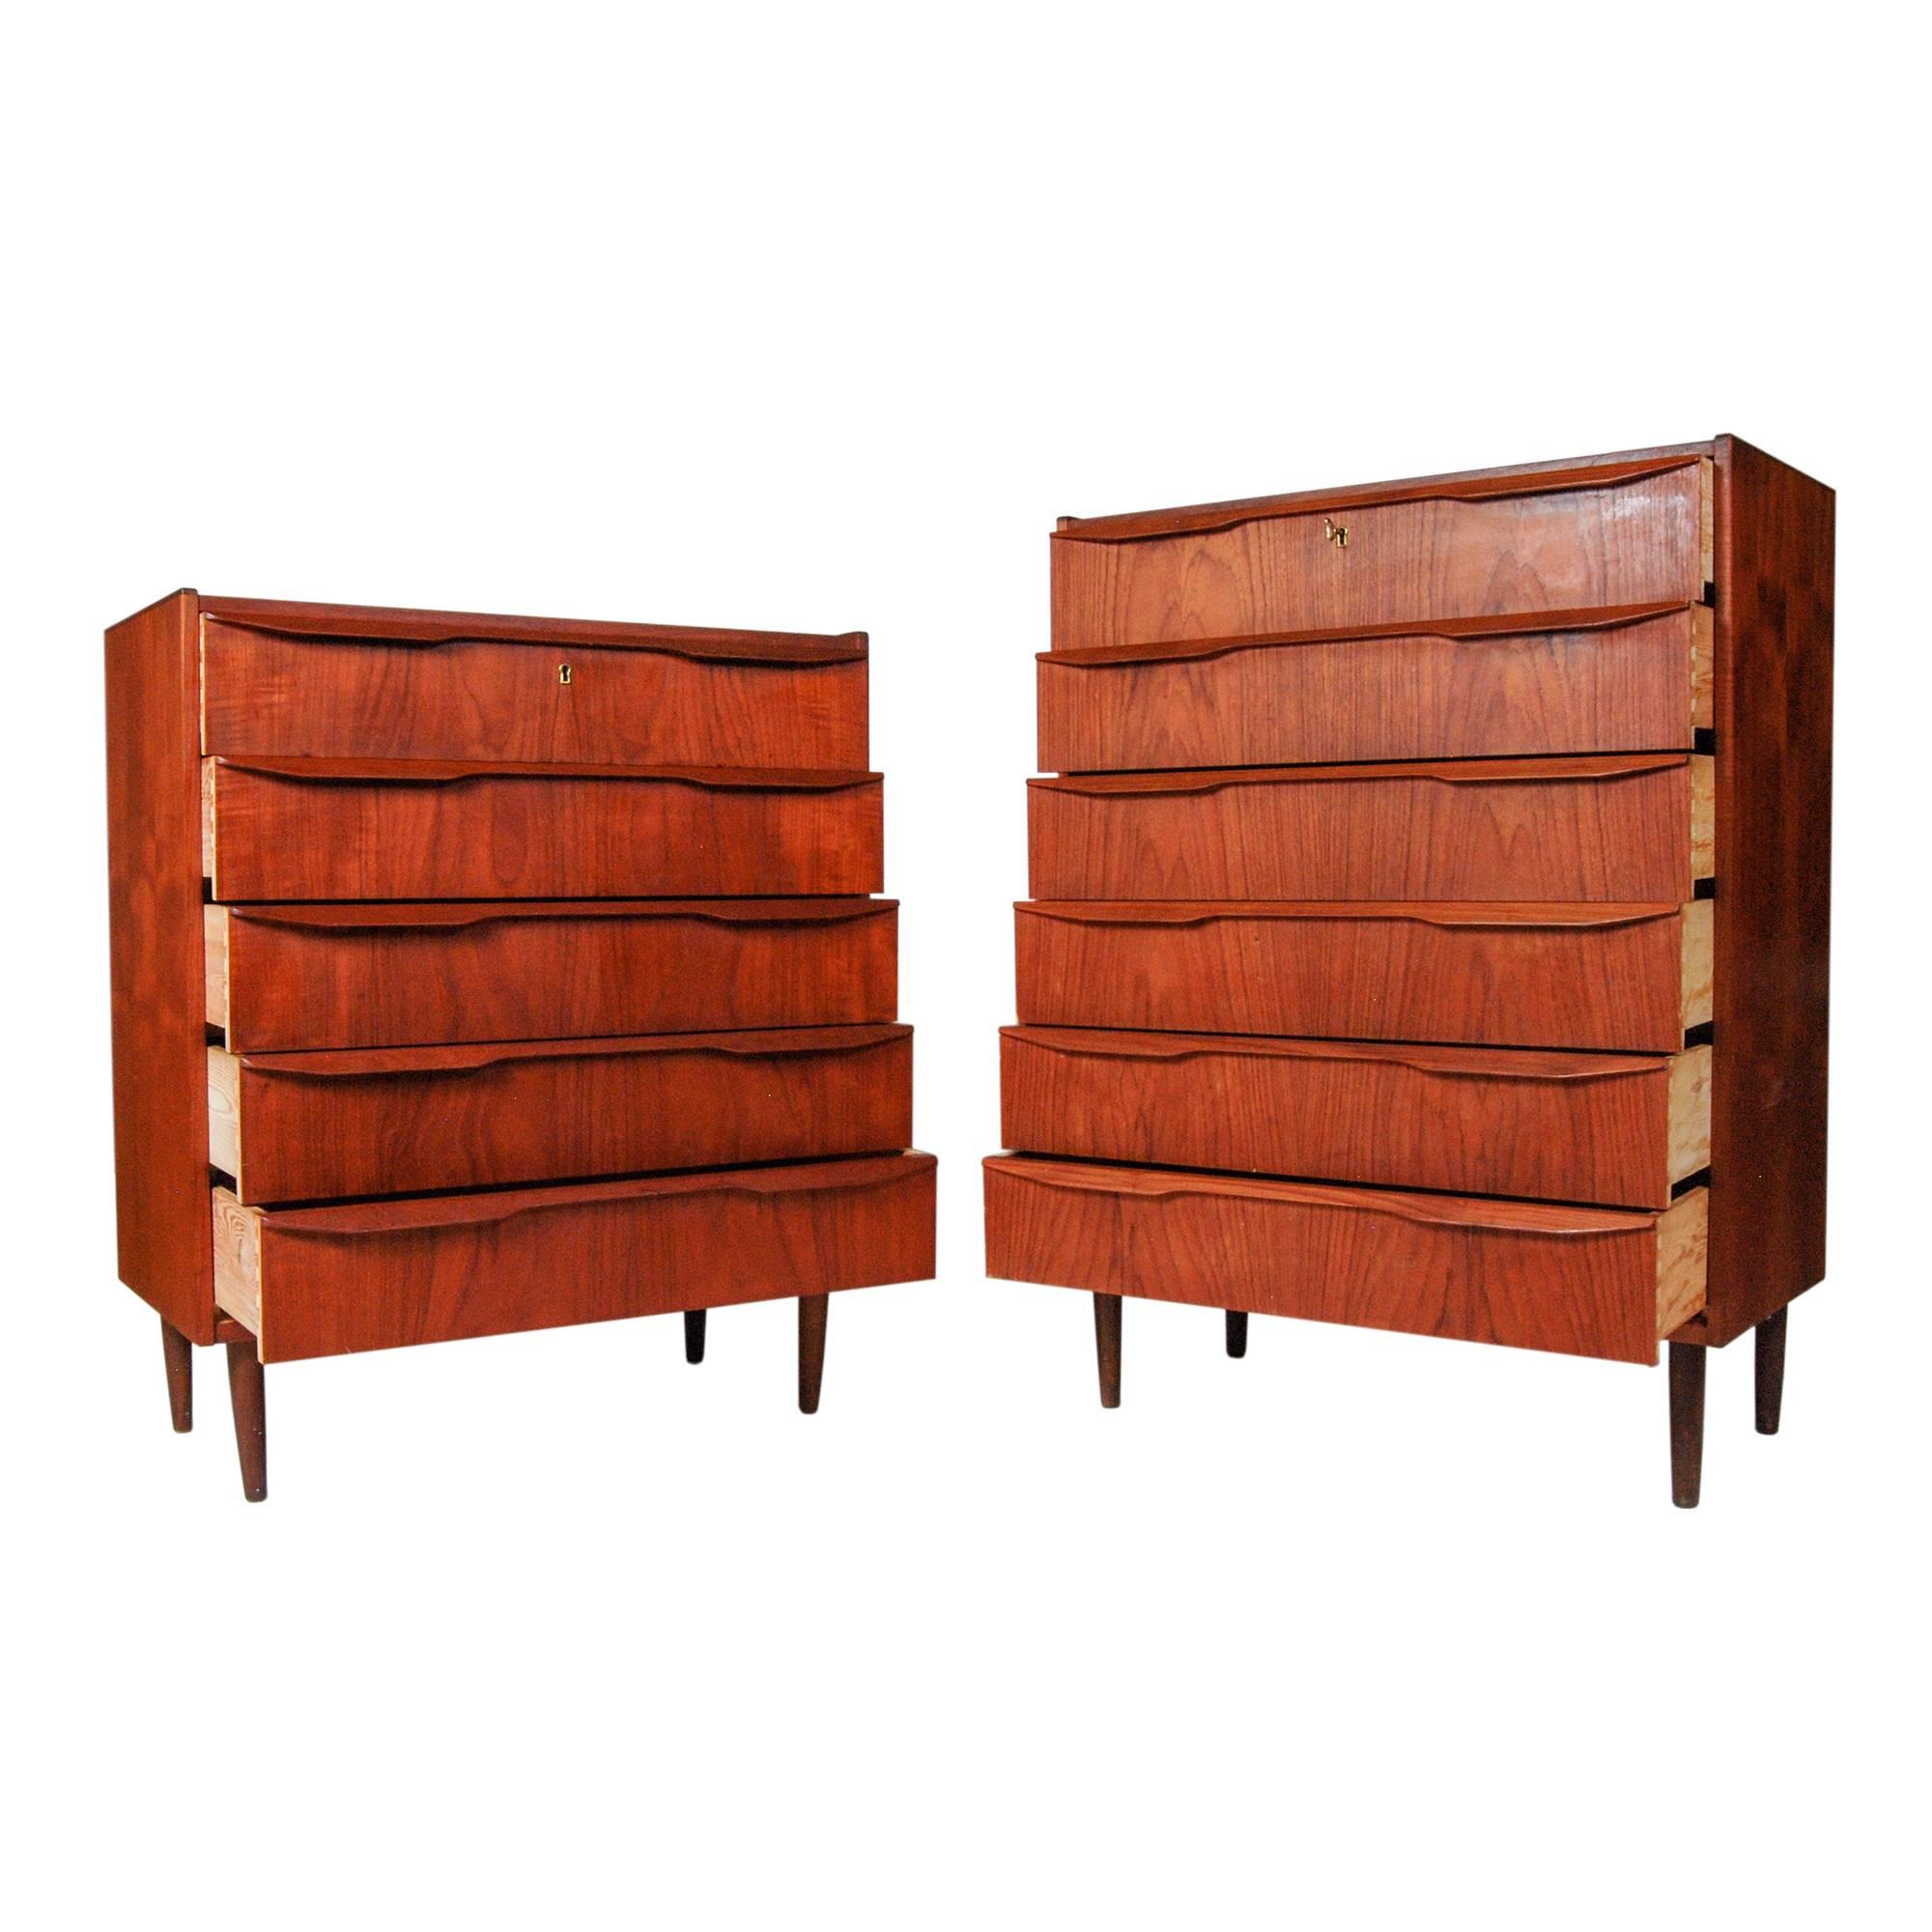 Vintage pair of 1960s Danish teak "His and Her" tall dressers with sculpted wood handles. Each dresser has working locks and a key. Taller dresser has six drawers and the smaller dresser has five drawers. Measures: Smaller dresser: